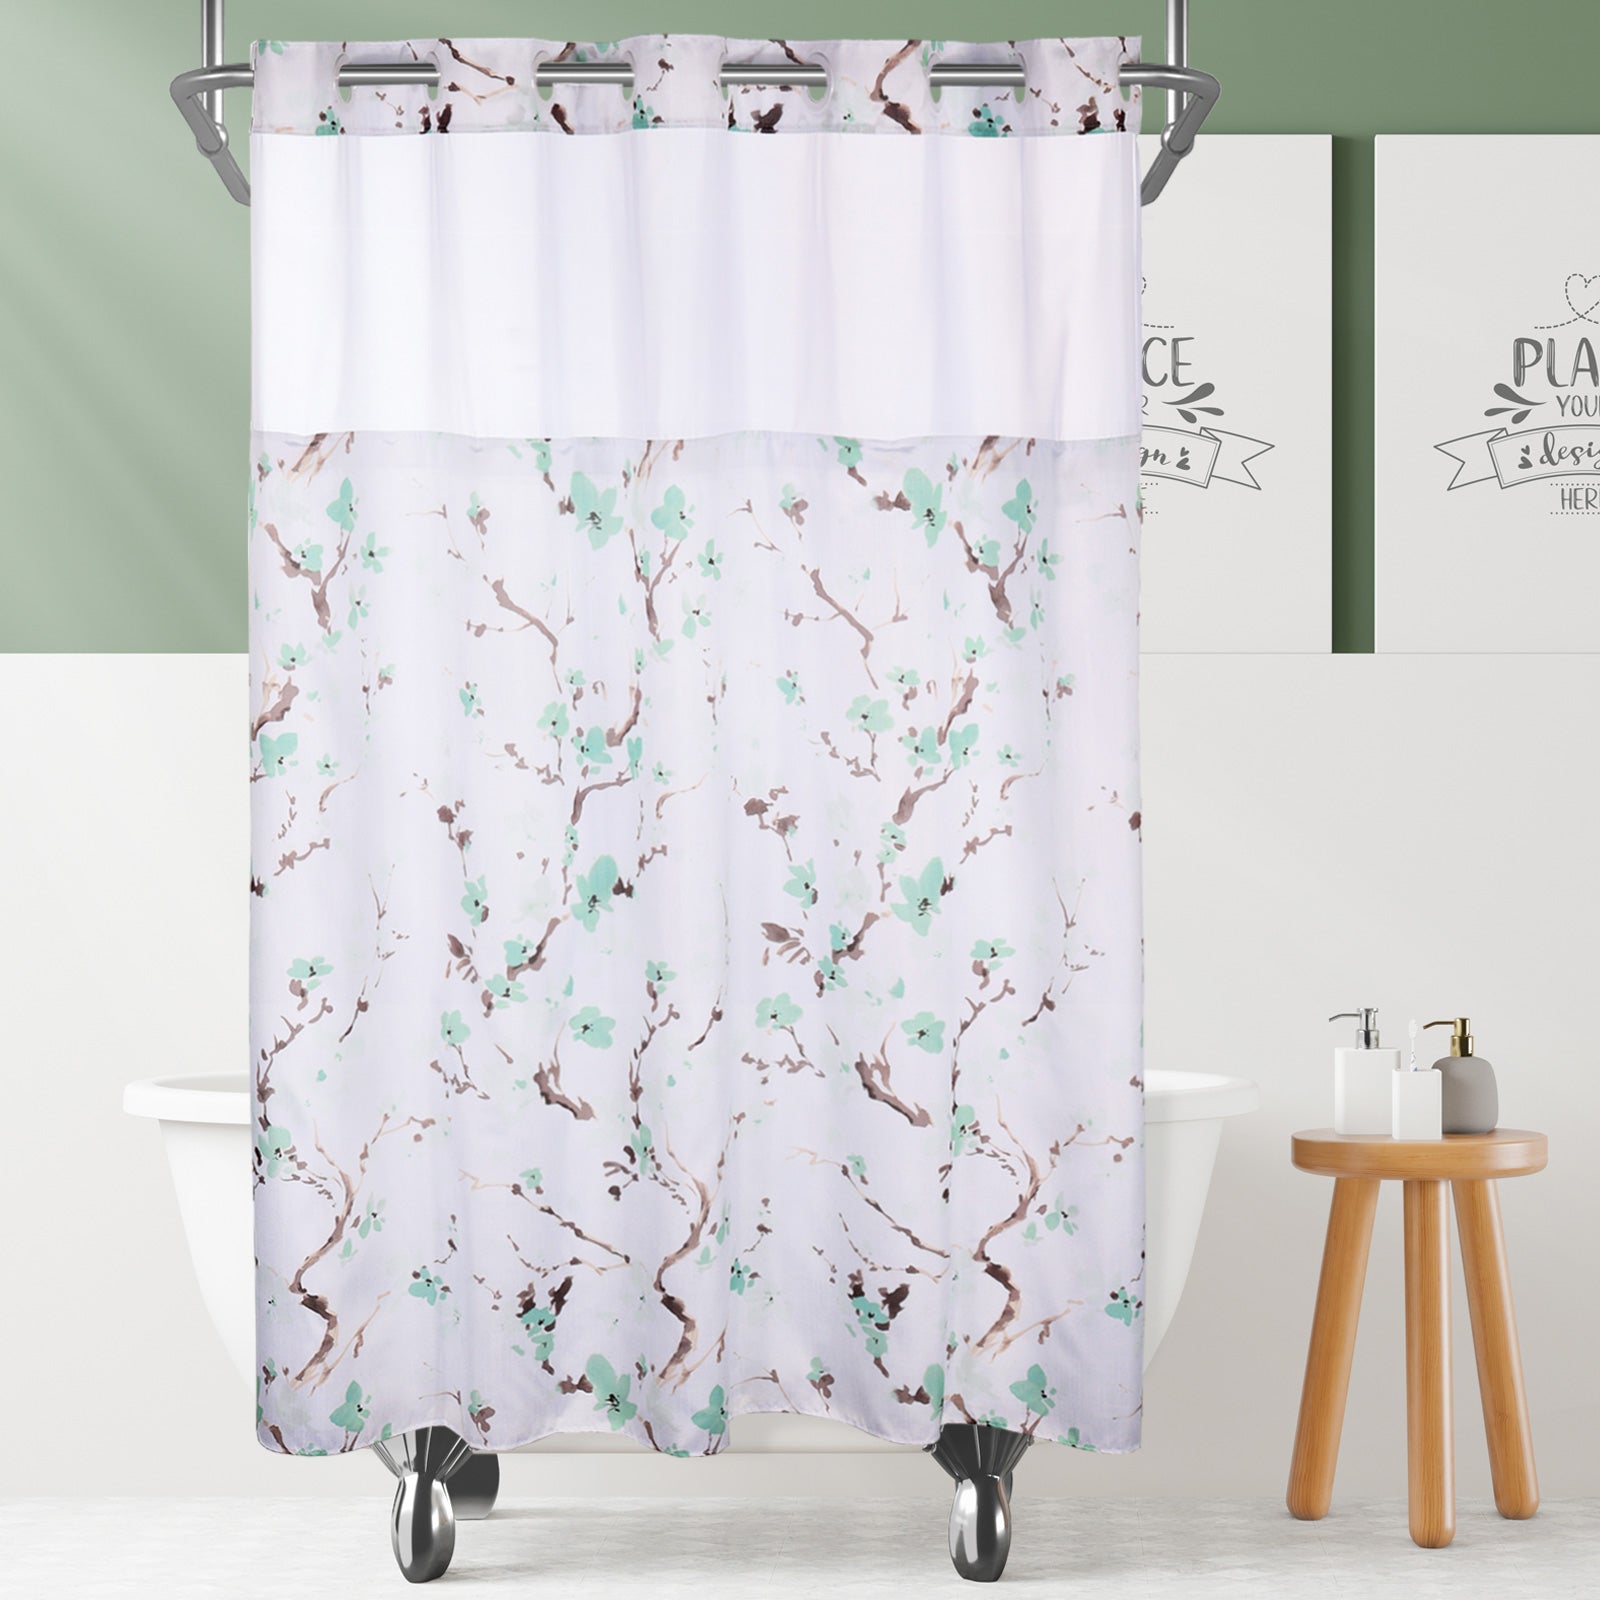 Lagute SnapHook Hook Free Shower Curtain with Snap-in Liner , 71Wx74L, –  lagute